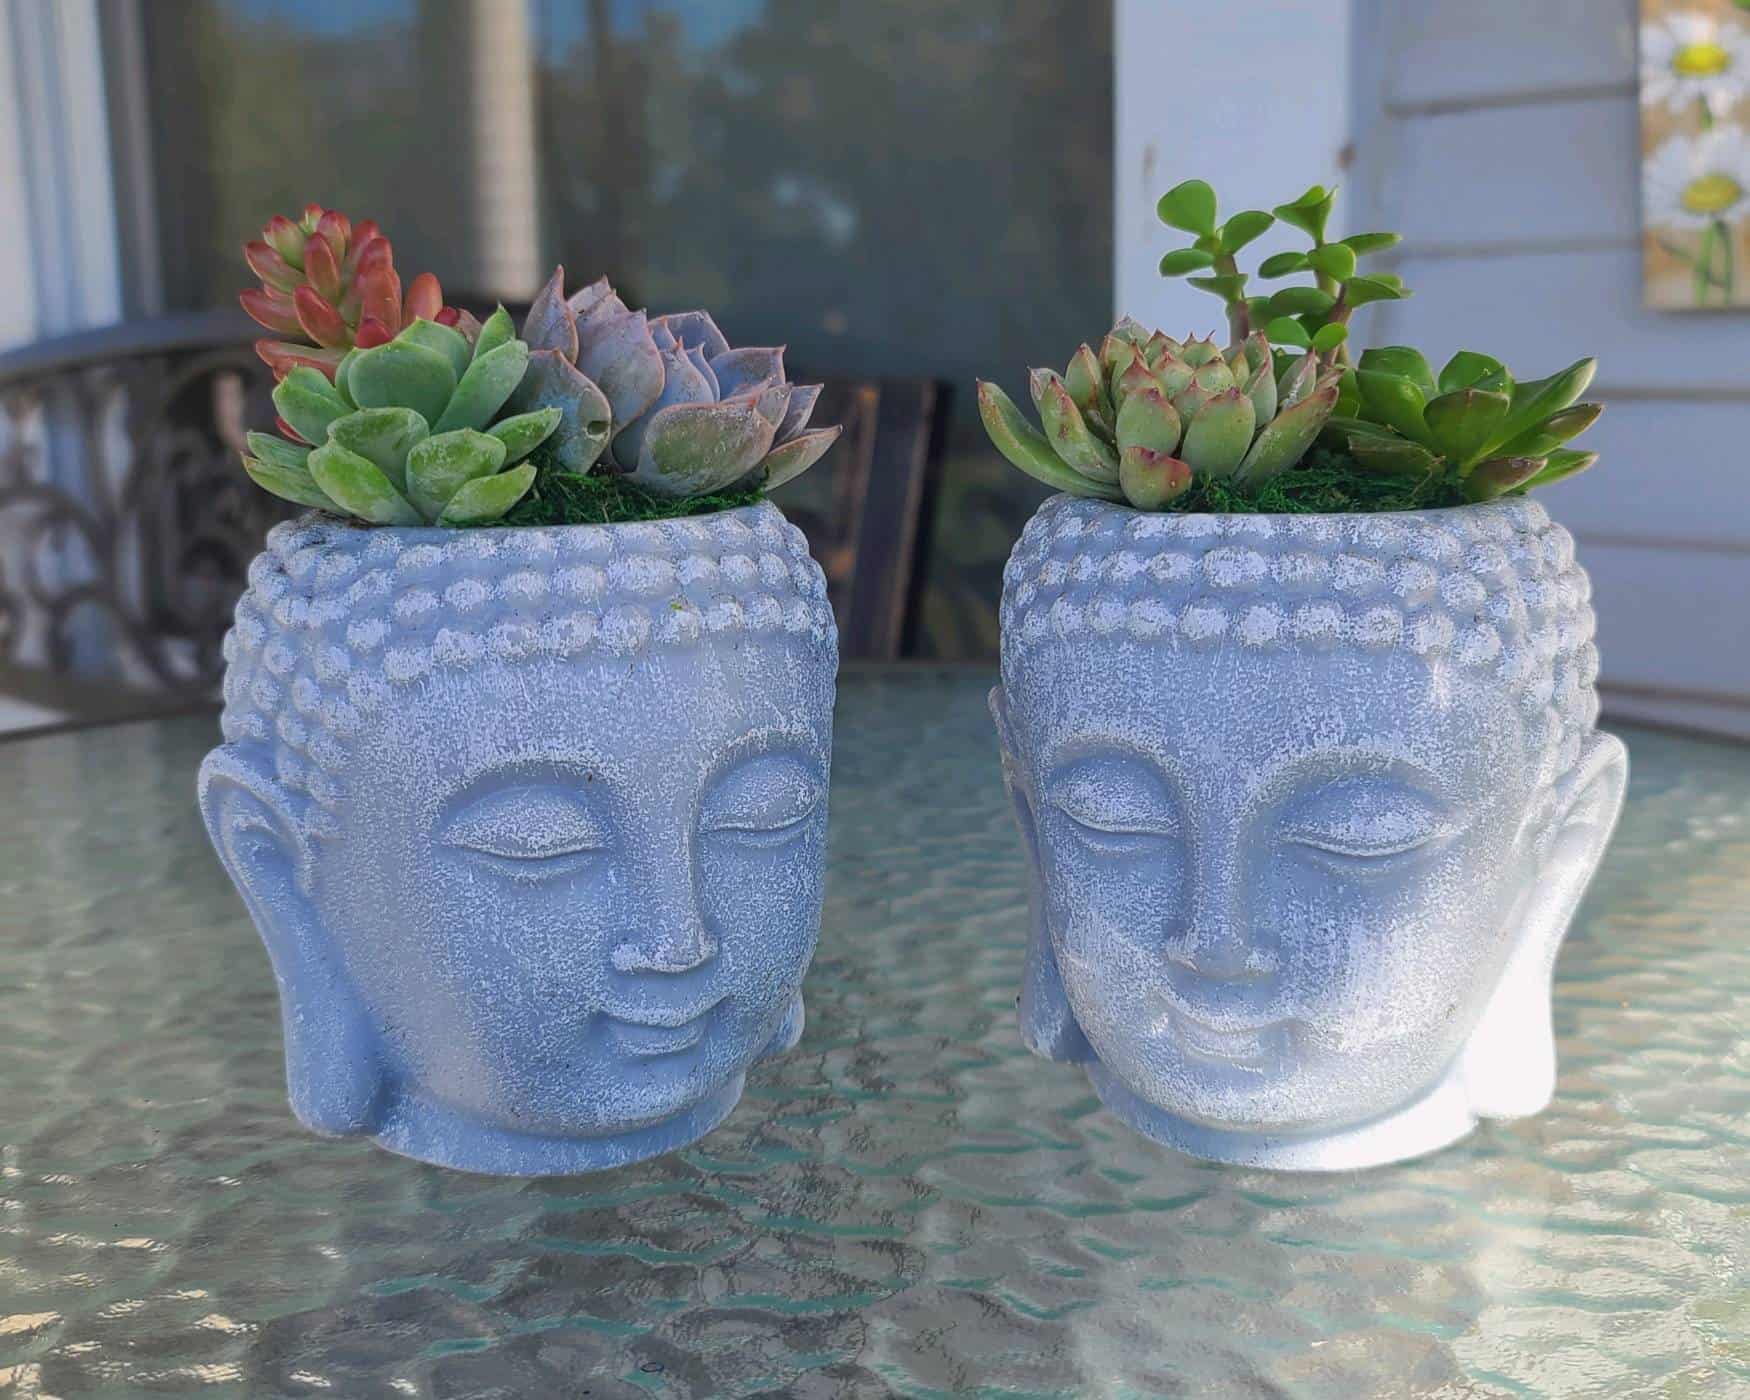 Buddha Head Planter with live succulent